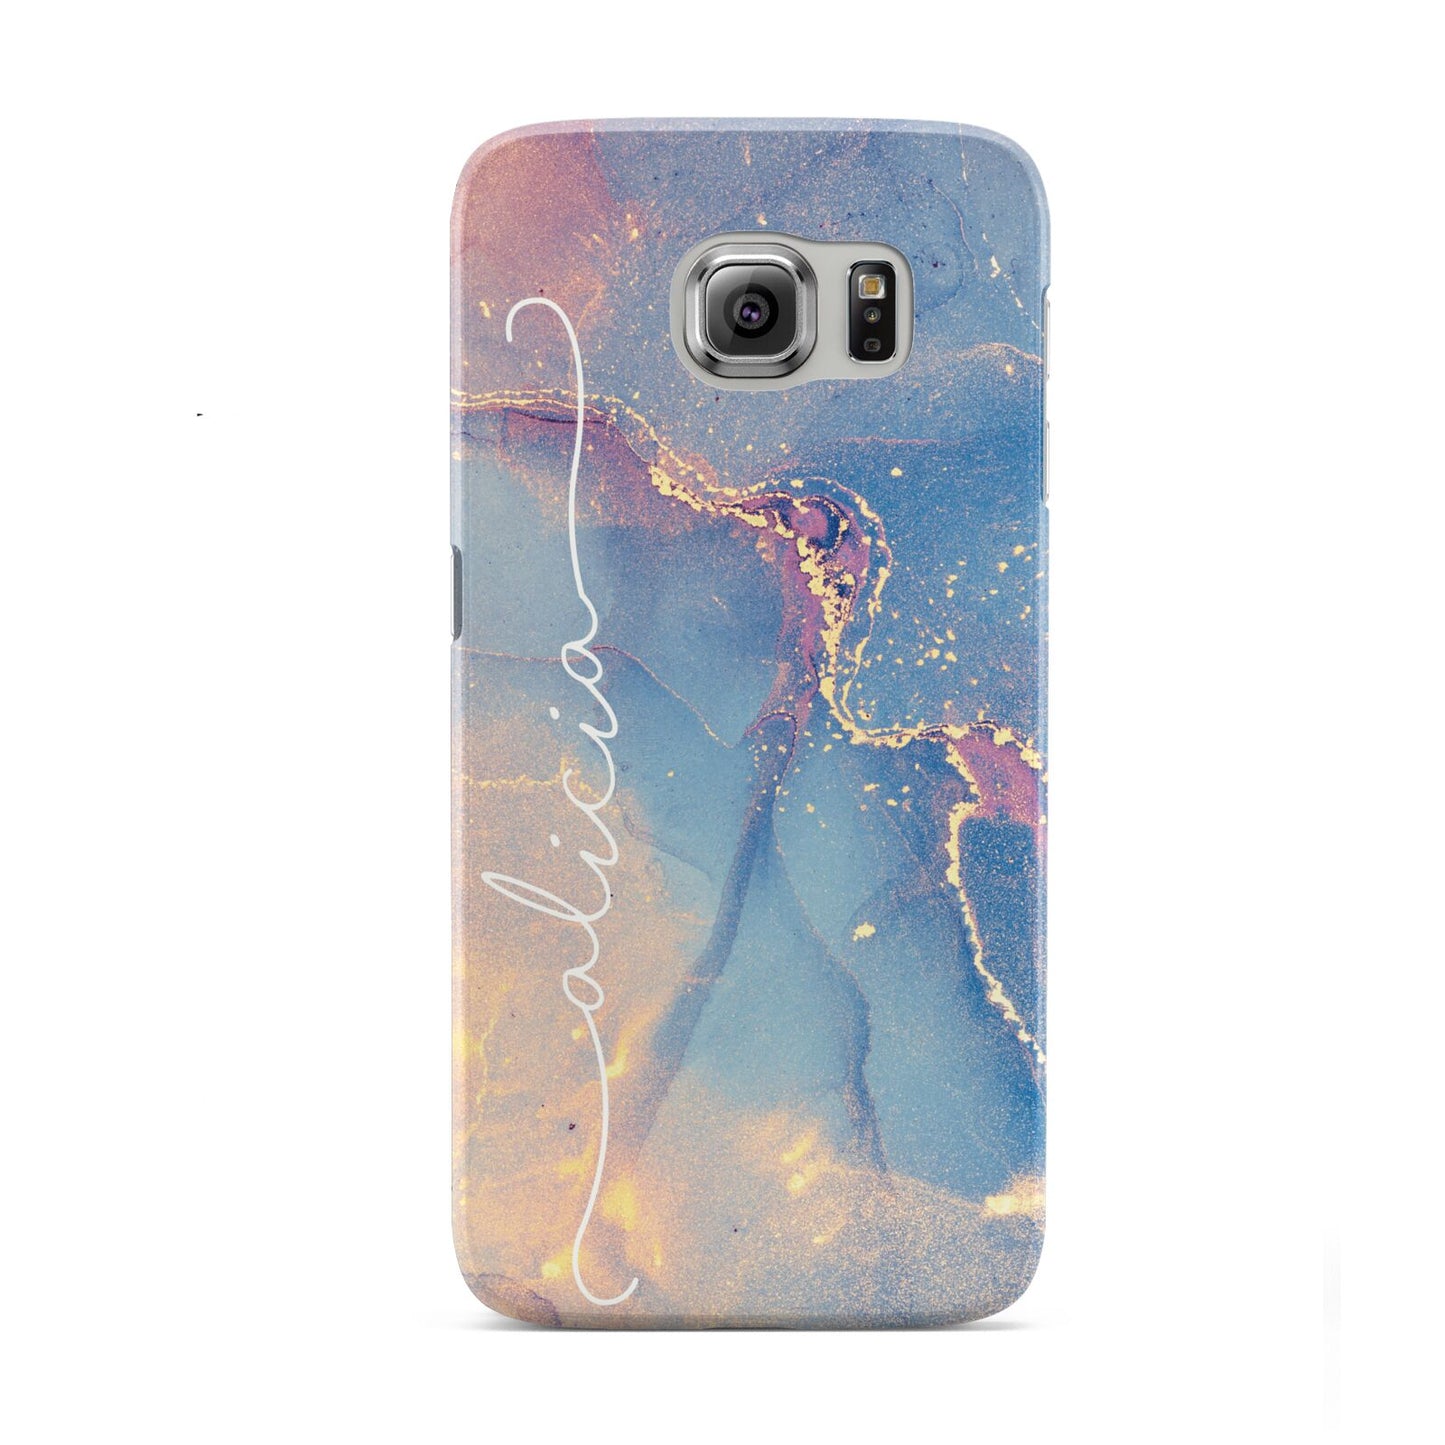 Blue and Pink Marble Samsung Galaxy S6 Case